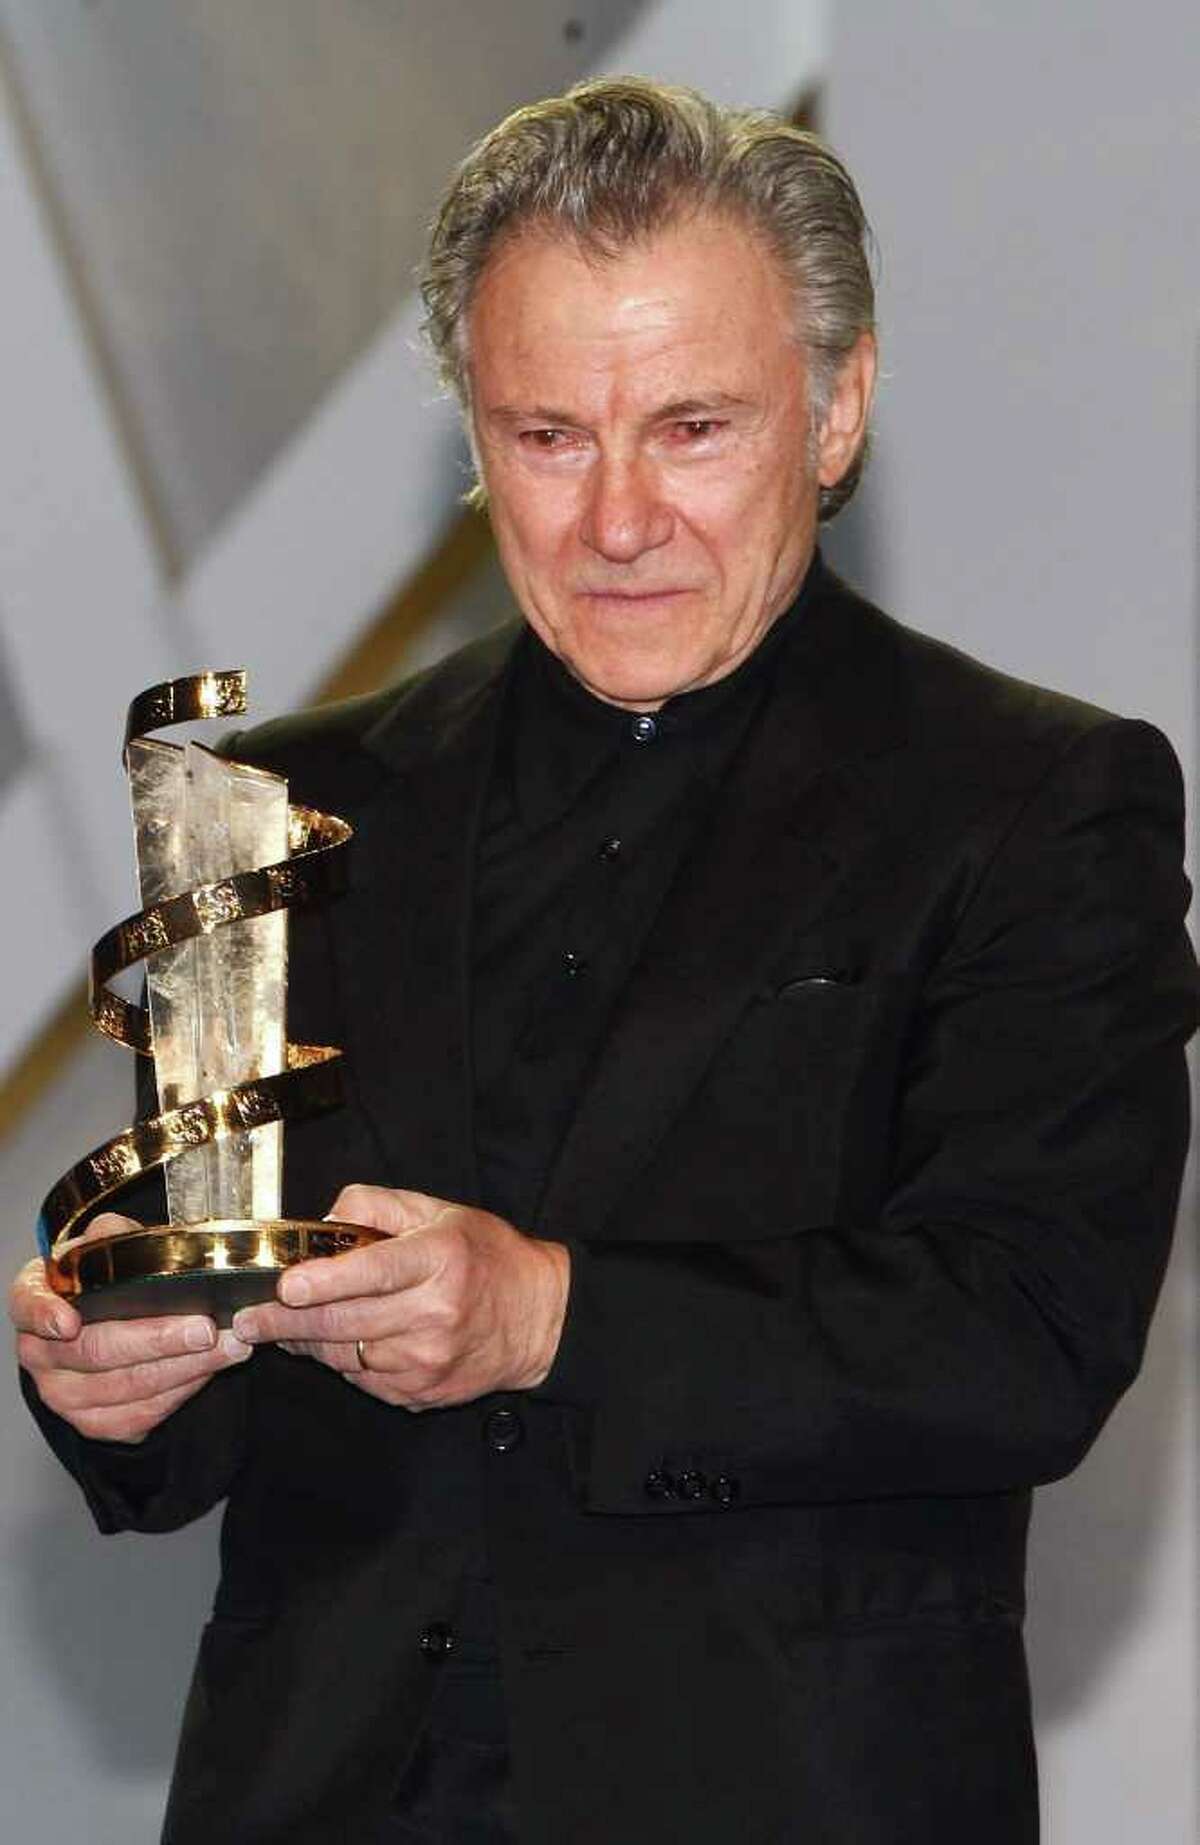 Us actor Harvey Keitel reacts, after receiving an award from US actress Susan Sarandon , during a tribute to his career, at the 10th Marrakech International Film Festival in Marrakech, Wednesday Dec. 8, 2010. The Festival runs through Dec. 3-11. (AP Photo/Abdeljalil Bounhar)